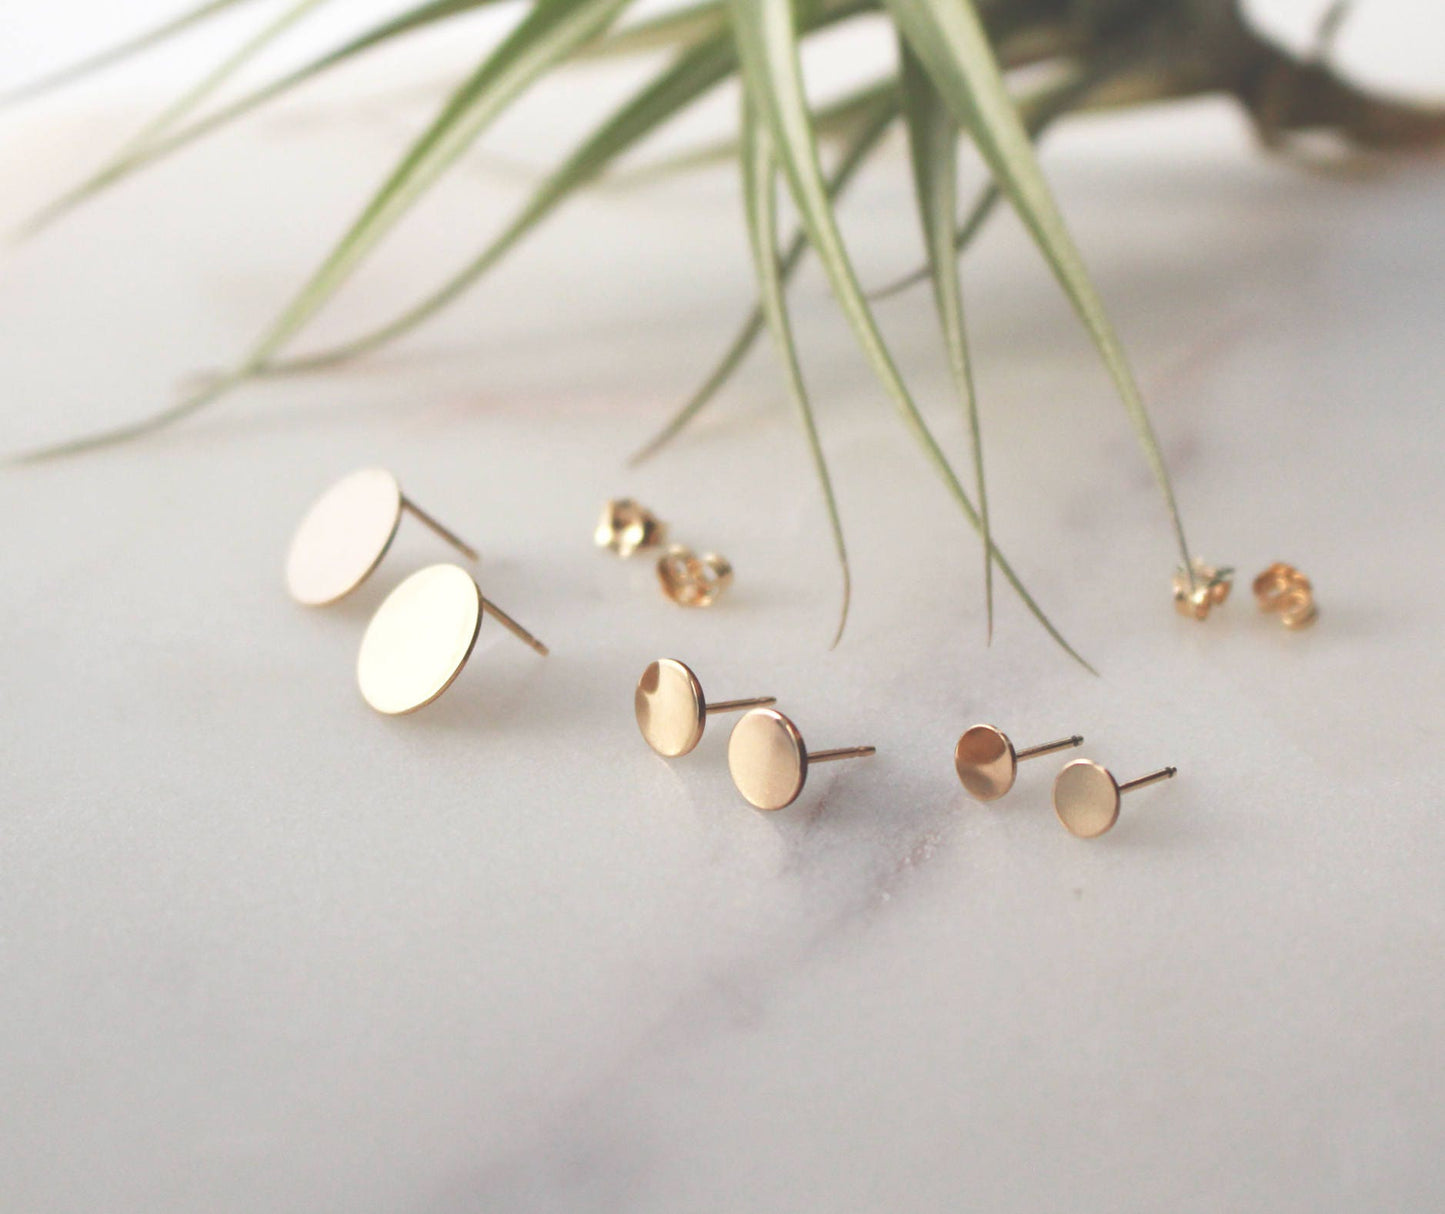 Round Disc Stud Earrings(Large) - 14K Gold Filled